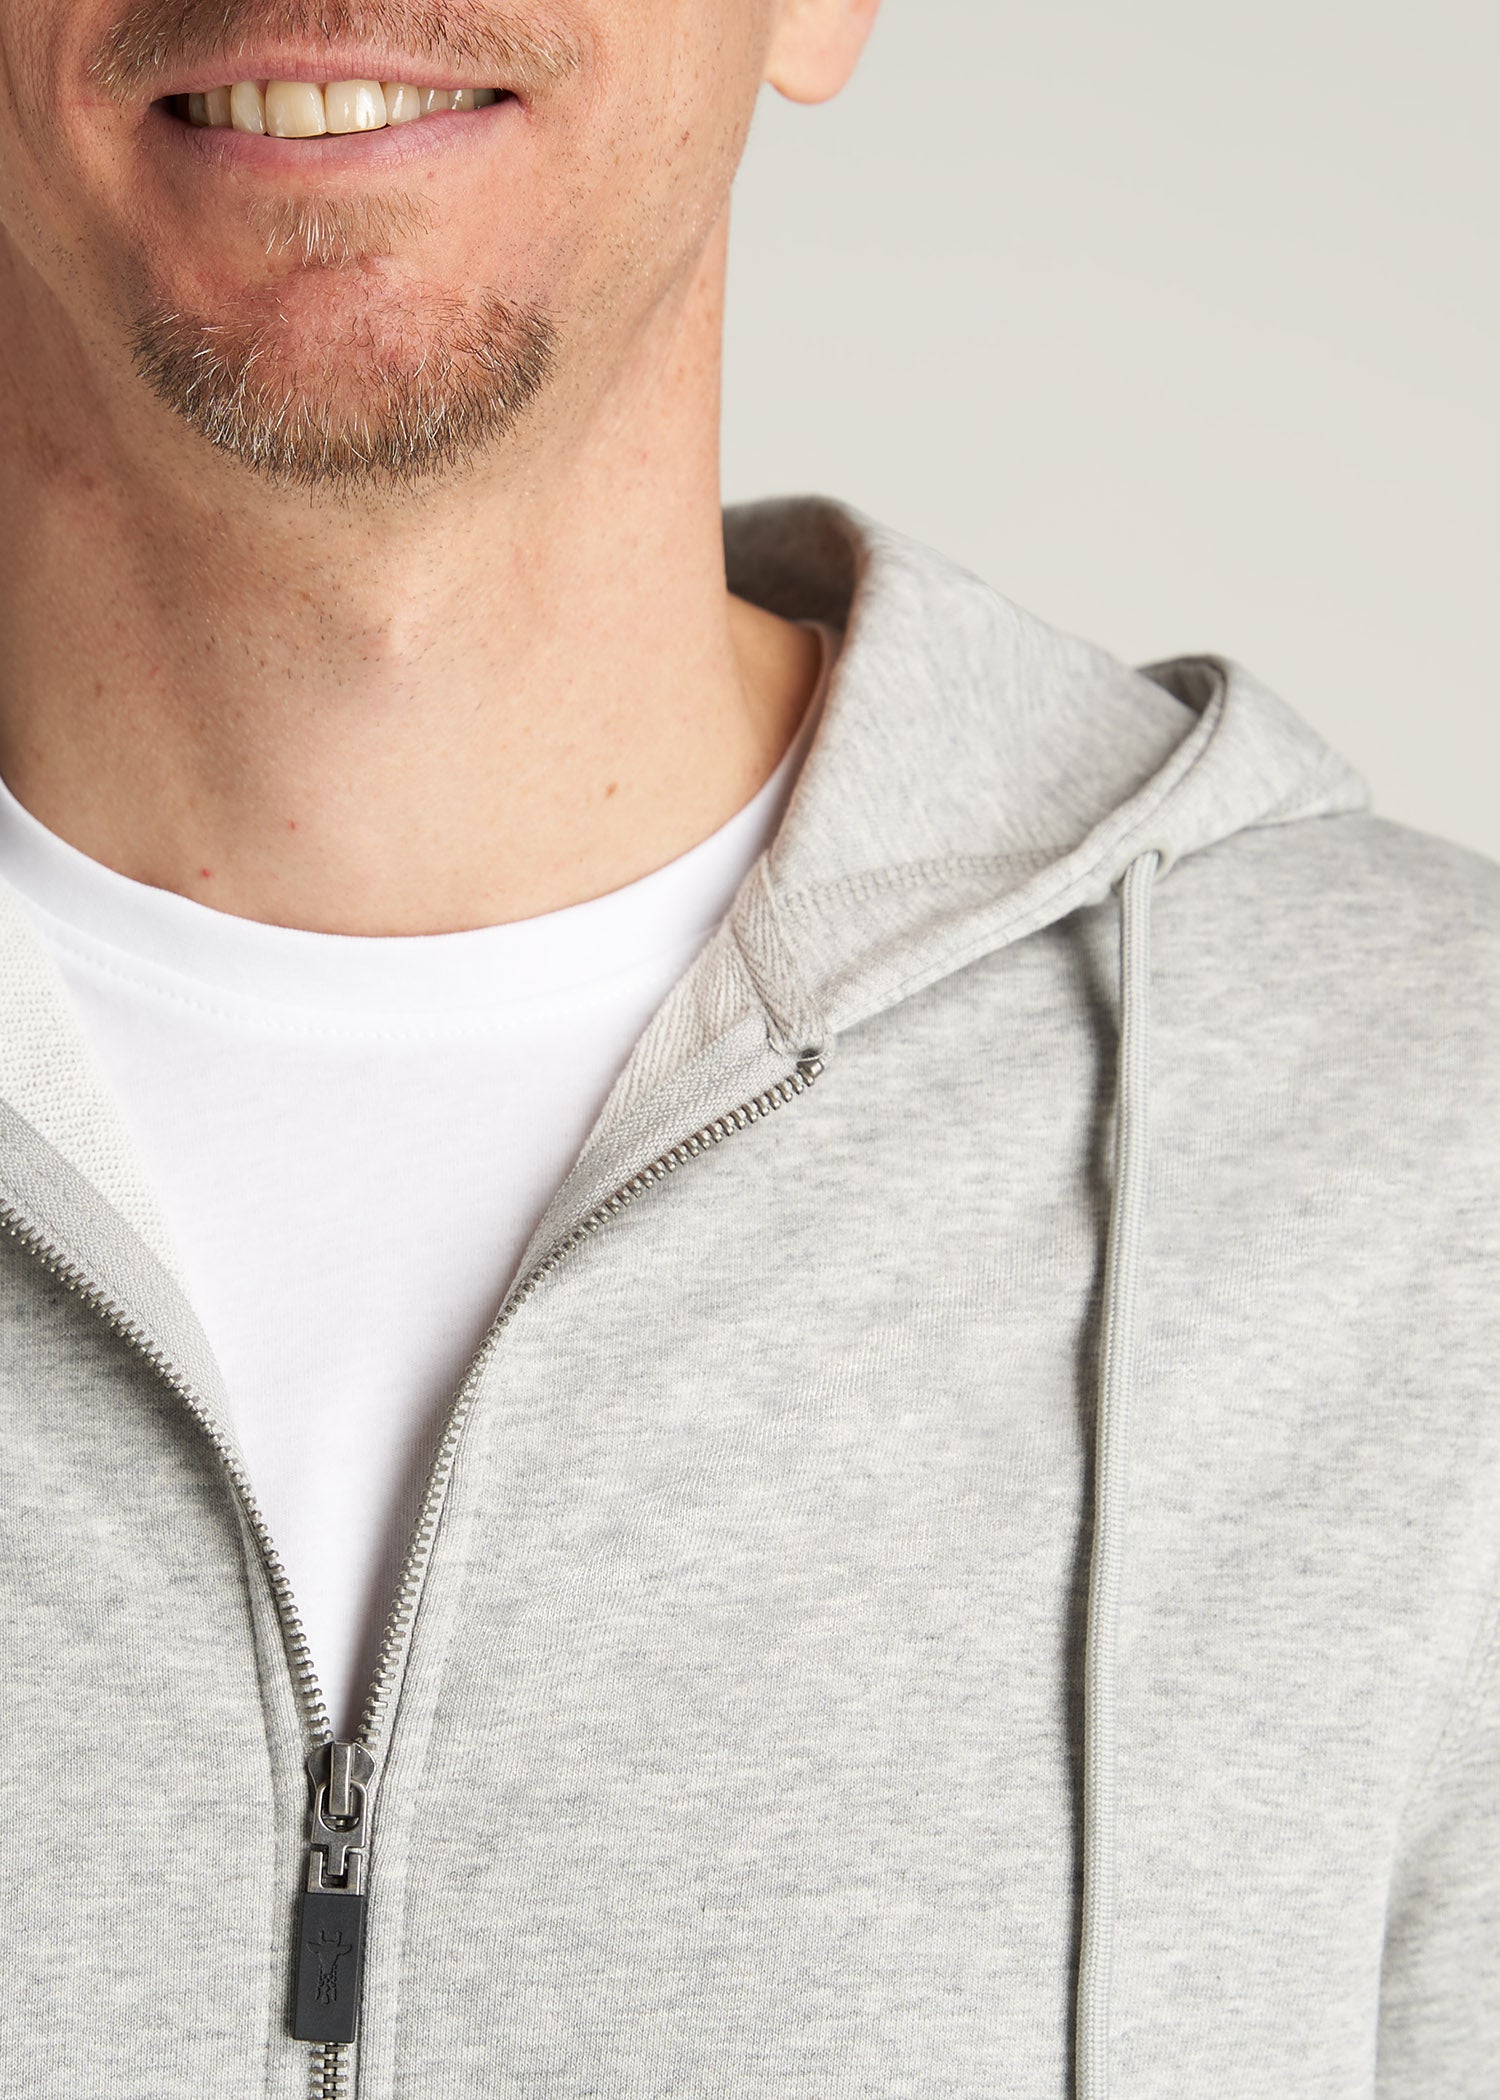       American-Tall-Men-8020-FrenchTerry-FullZip-Hoodie-GreyMix-detail